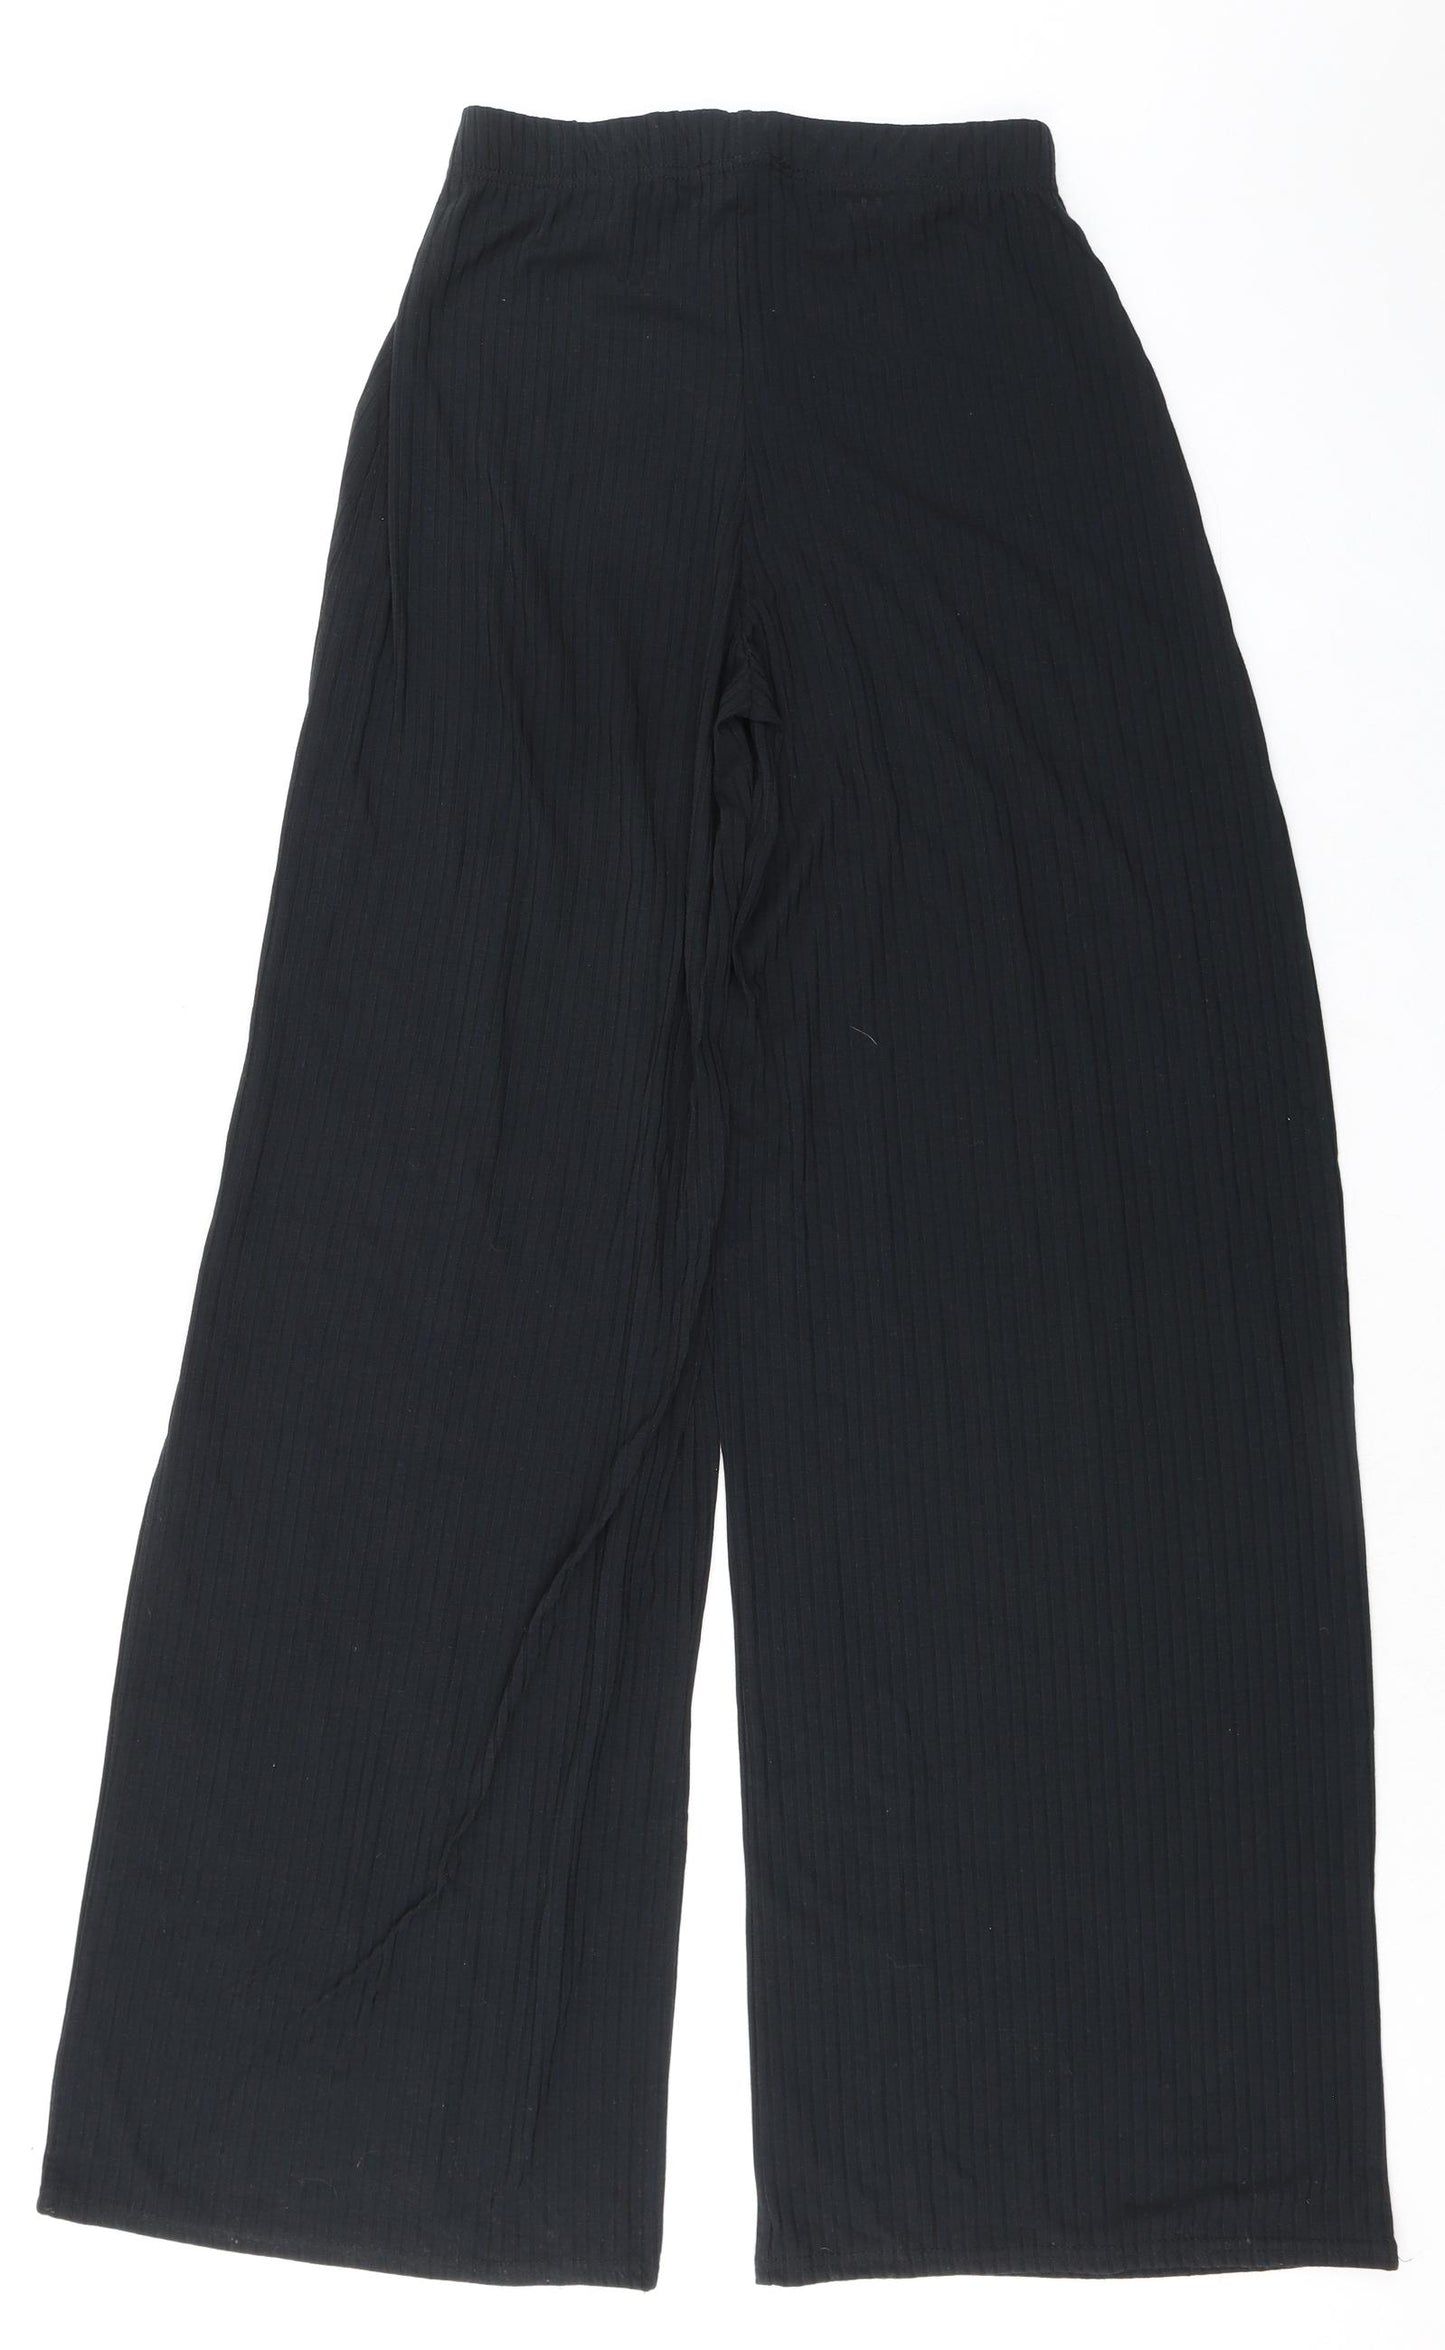 Long Tall Sally Womens Black Polyester Trousers Size 10 L35 in Regular - Ribbed Fabric